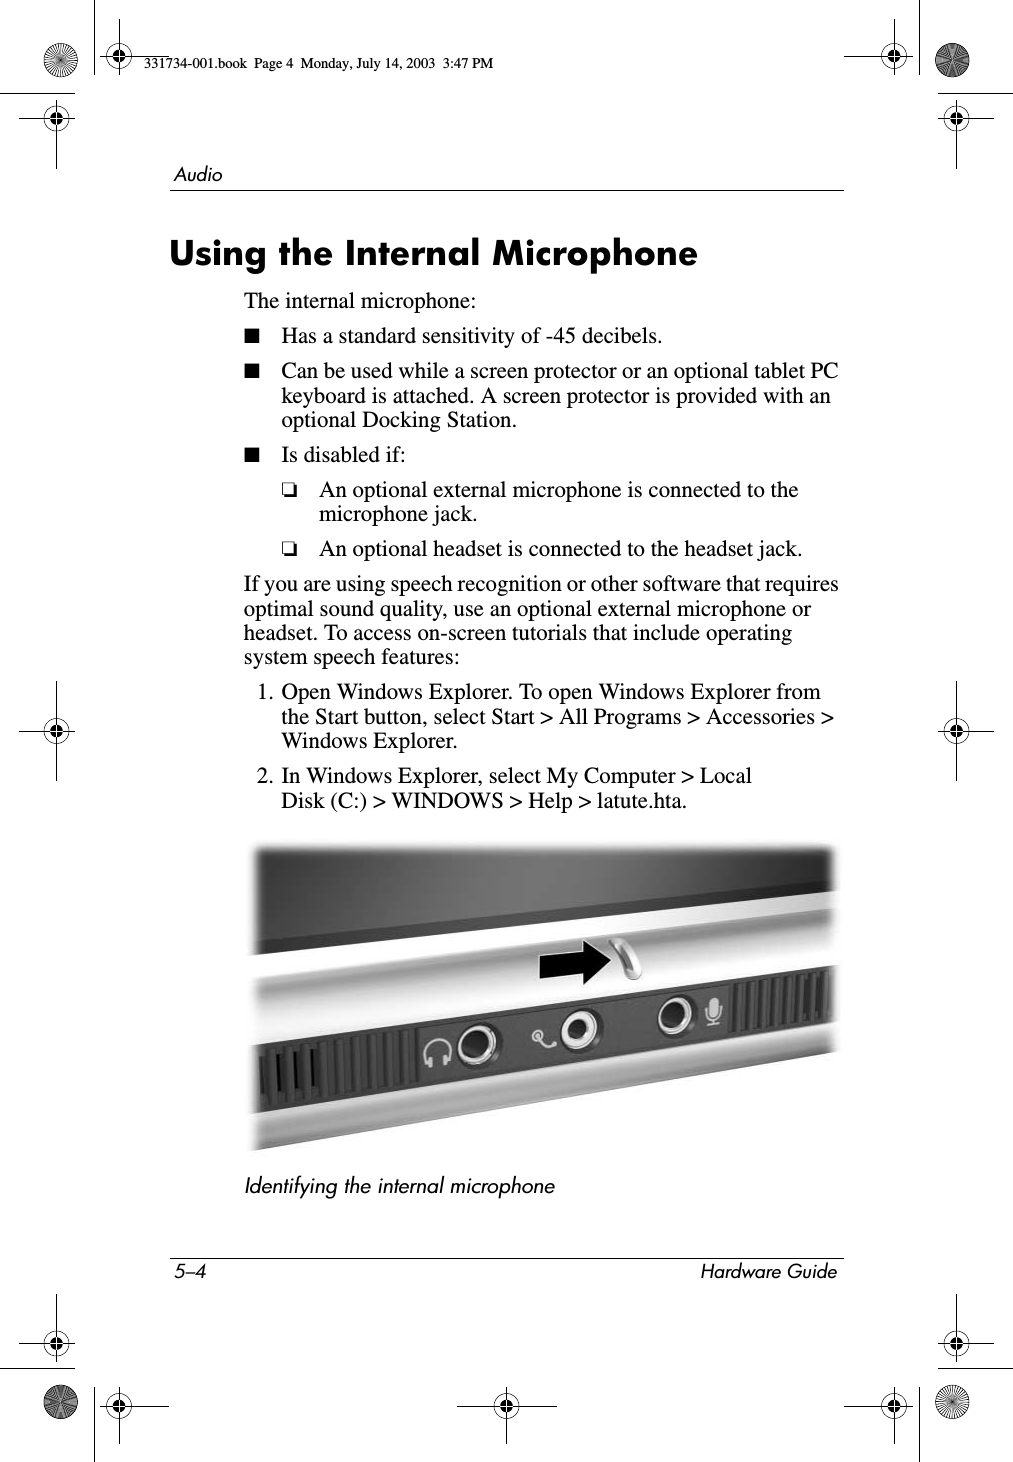 5–4 Hardware GuideAudioUsing the Internal MicrophoneThe internal microphone:■Has a standard sensitivity of -45 decibels.■Can be used while a screen protector or an optional tablet PC keyboard is attached. A screen protector is provided with an optional Docking Station.■Is disabled if:❏An optional external microphone is connected to the microphone jack.❏An optional headset is connected to the headset jack.If you are using speech recognition or other software that requires optimal sound quality, use an optional external microphone or headset. To access on-screen tutorials that include operating system speech features:1. Open Windows Explorer. To open Windows Explorer from the Start button, select Start &gt; All Programs &gt; Accessories &gt; Windows Explorer.2. In Windows Explorer, select My Computer &gt; Local Disk (C:) &gt; WINDOWS &gt; Help &gt; latute.hta.Identifying the internal microphone331734-001.book  Page 4  Monday, July 14, 2003  3:47 PM